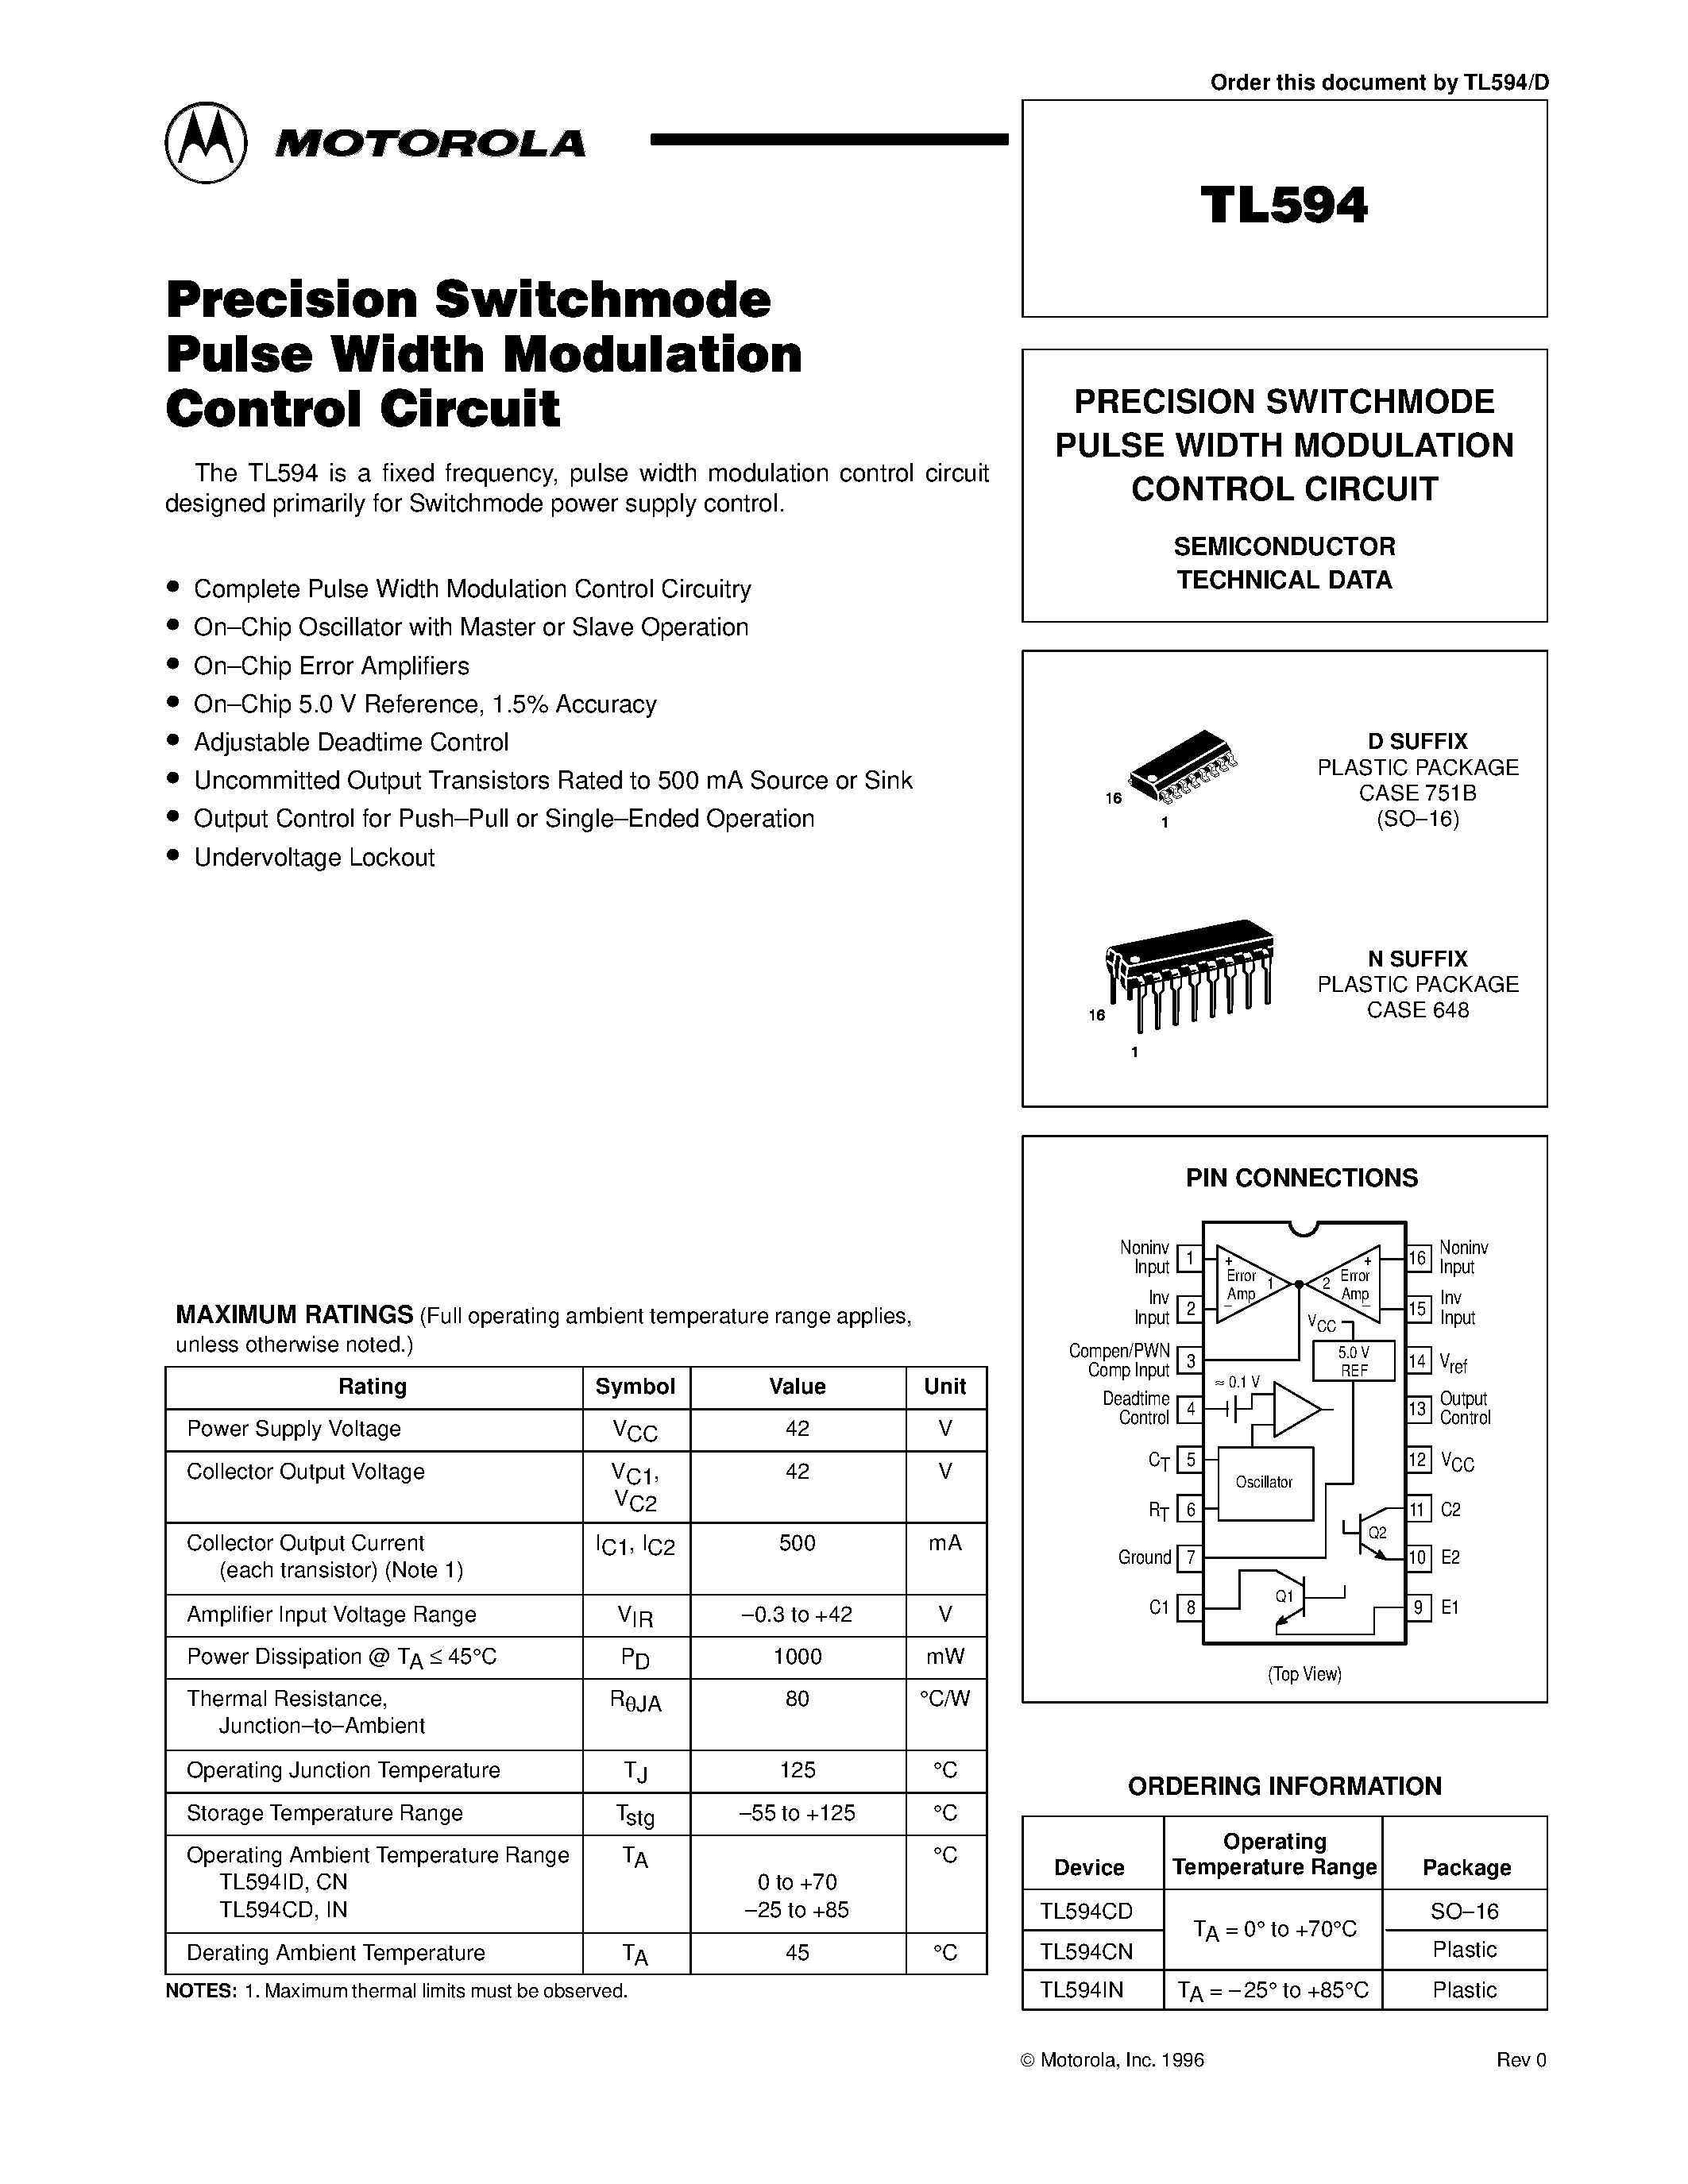 Datasheet TL594CN - PRECISION SWITCHMODE PULSE WIDTH MODULATION CONTROL CIRCUIT page 1